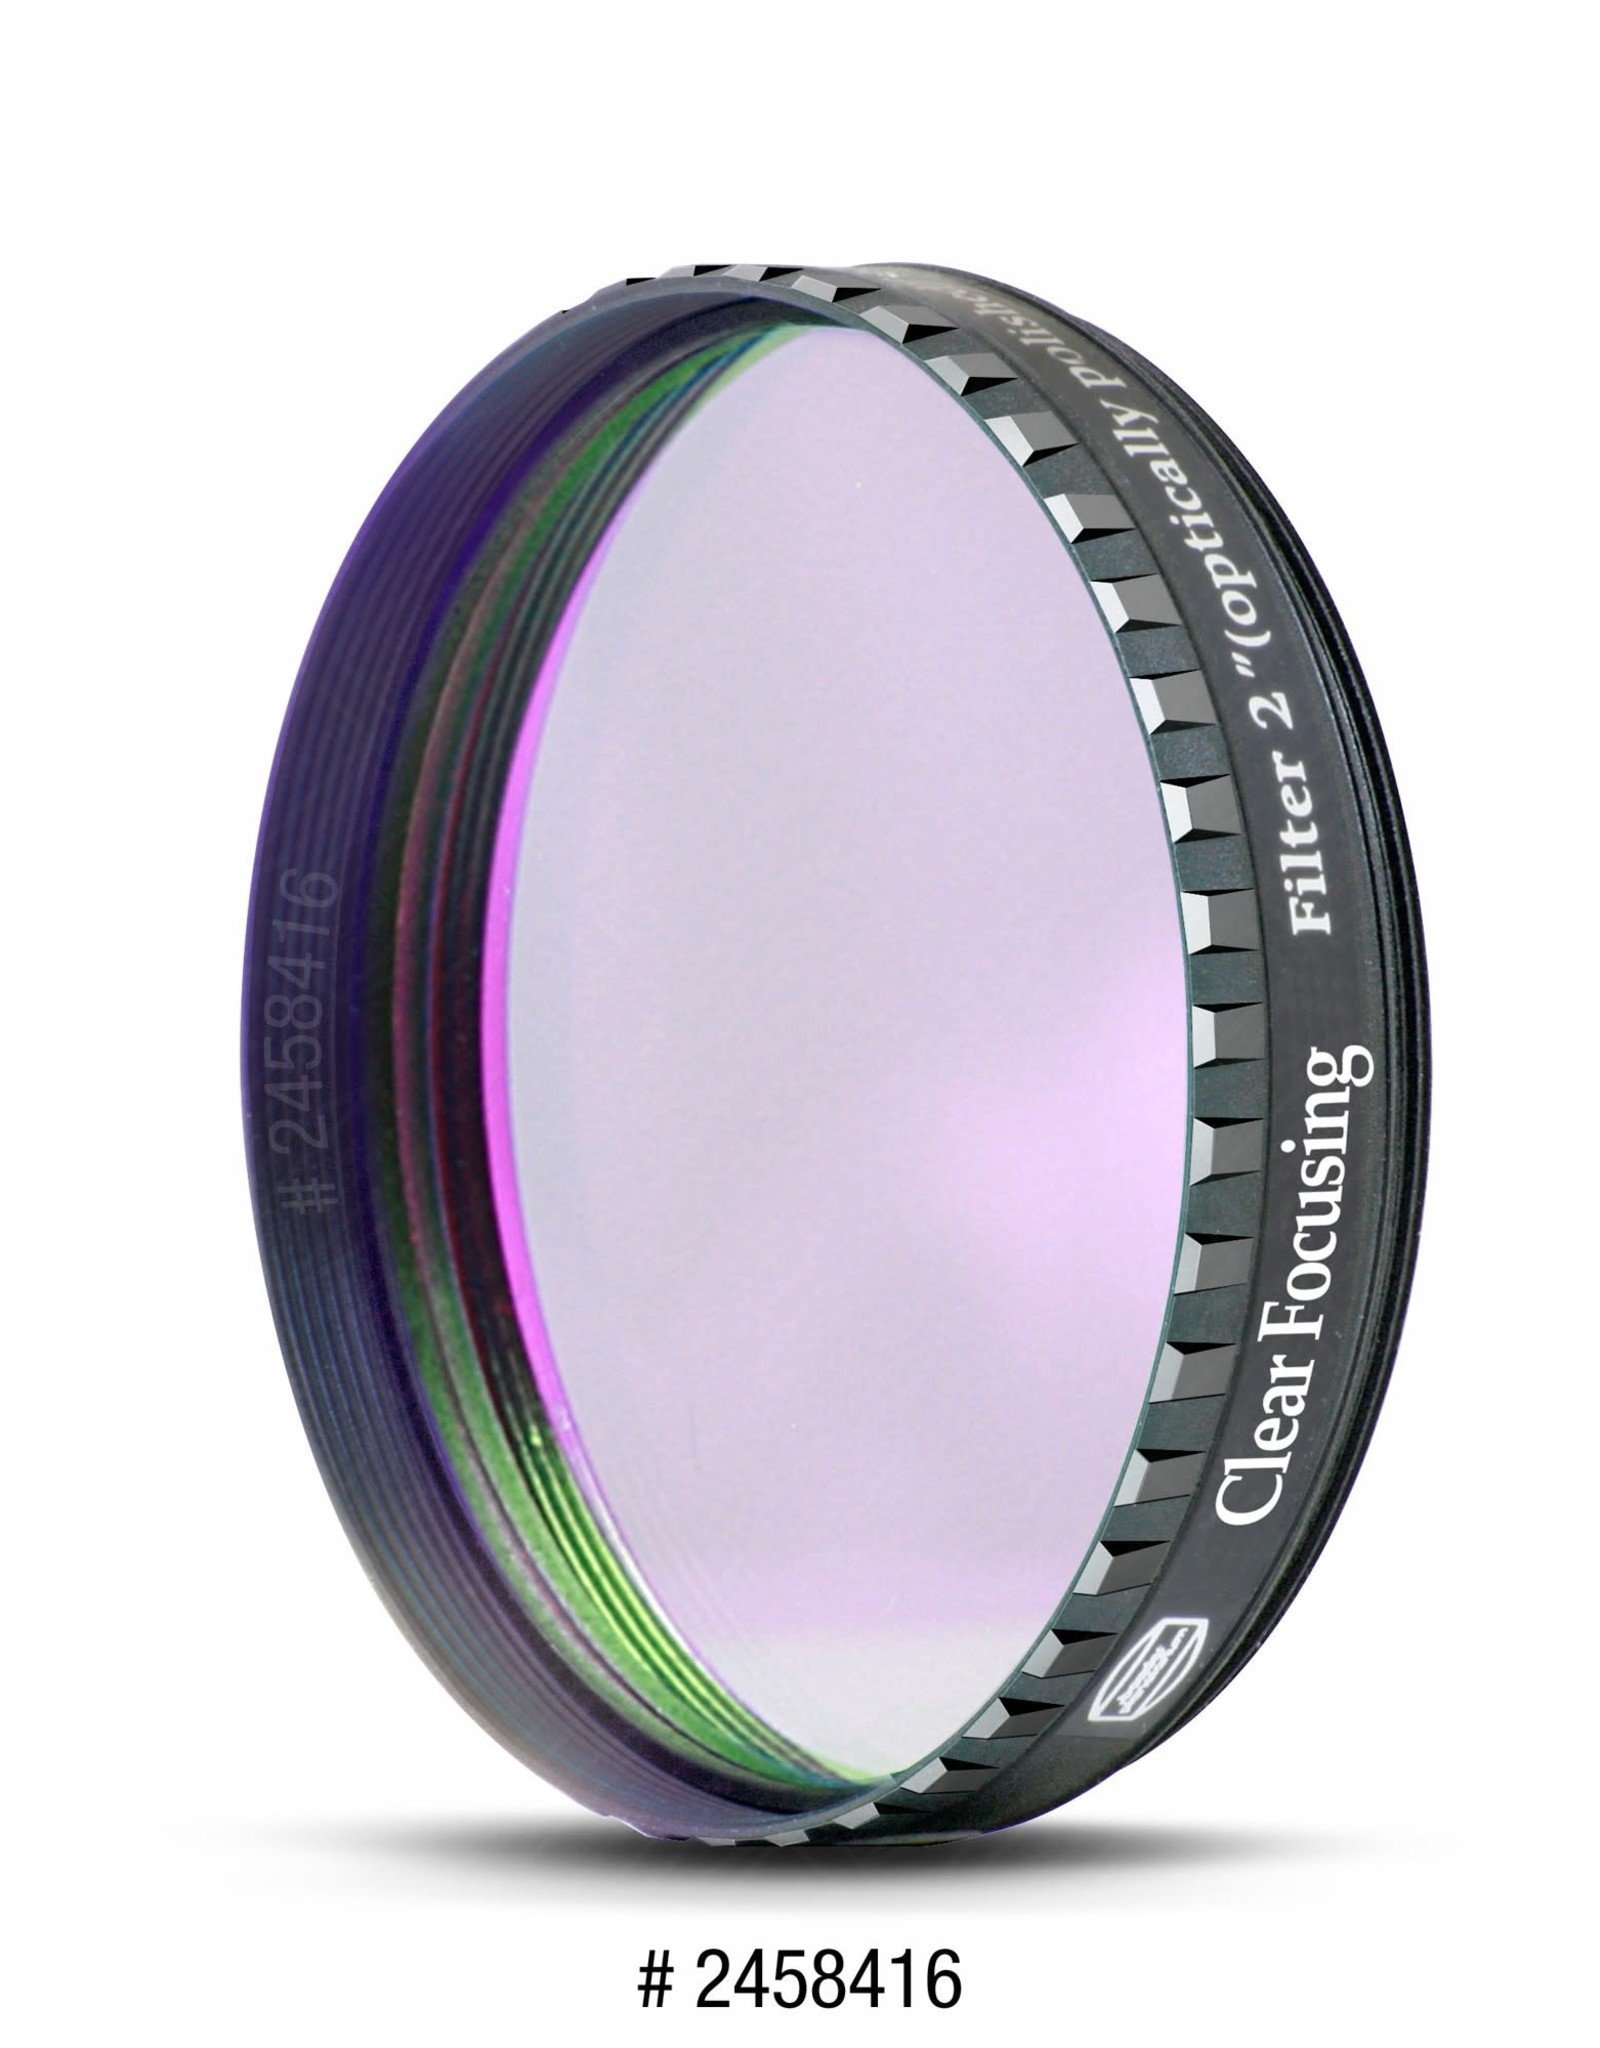 Baader Planetarium Baader Clearglass Filter (C) for focusing / dust protection (Specify Size)